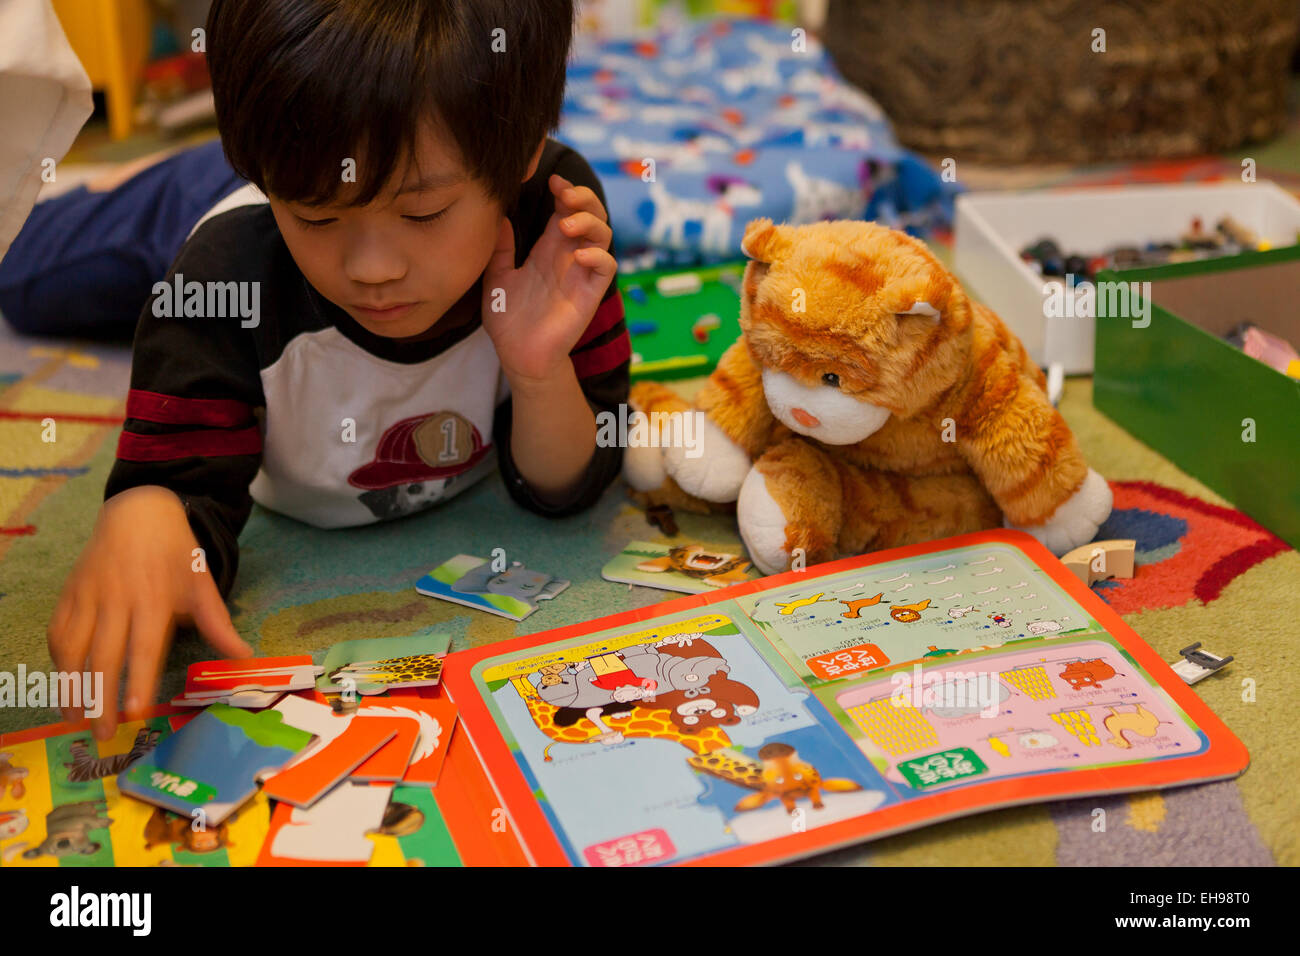 Child playing board game with stuffed cat Stock Photo